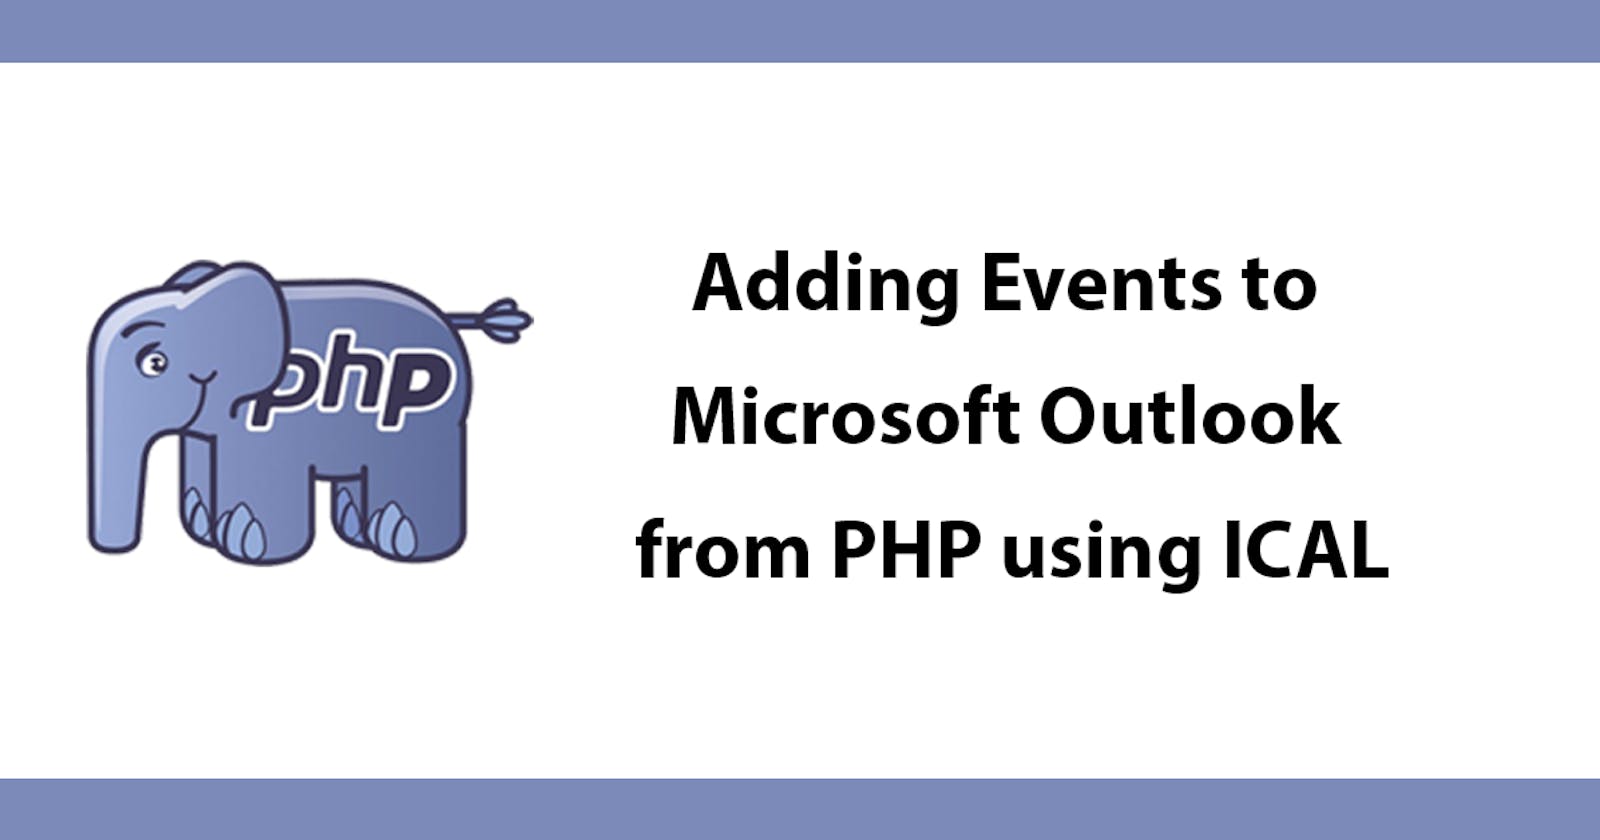 Adding Events to Microsoft Outlook from PHP using ICAL